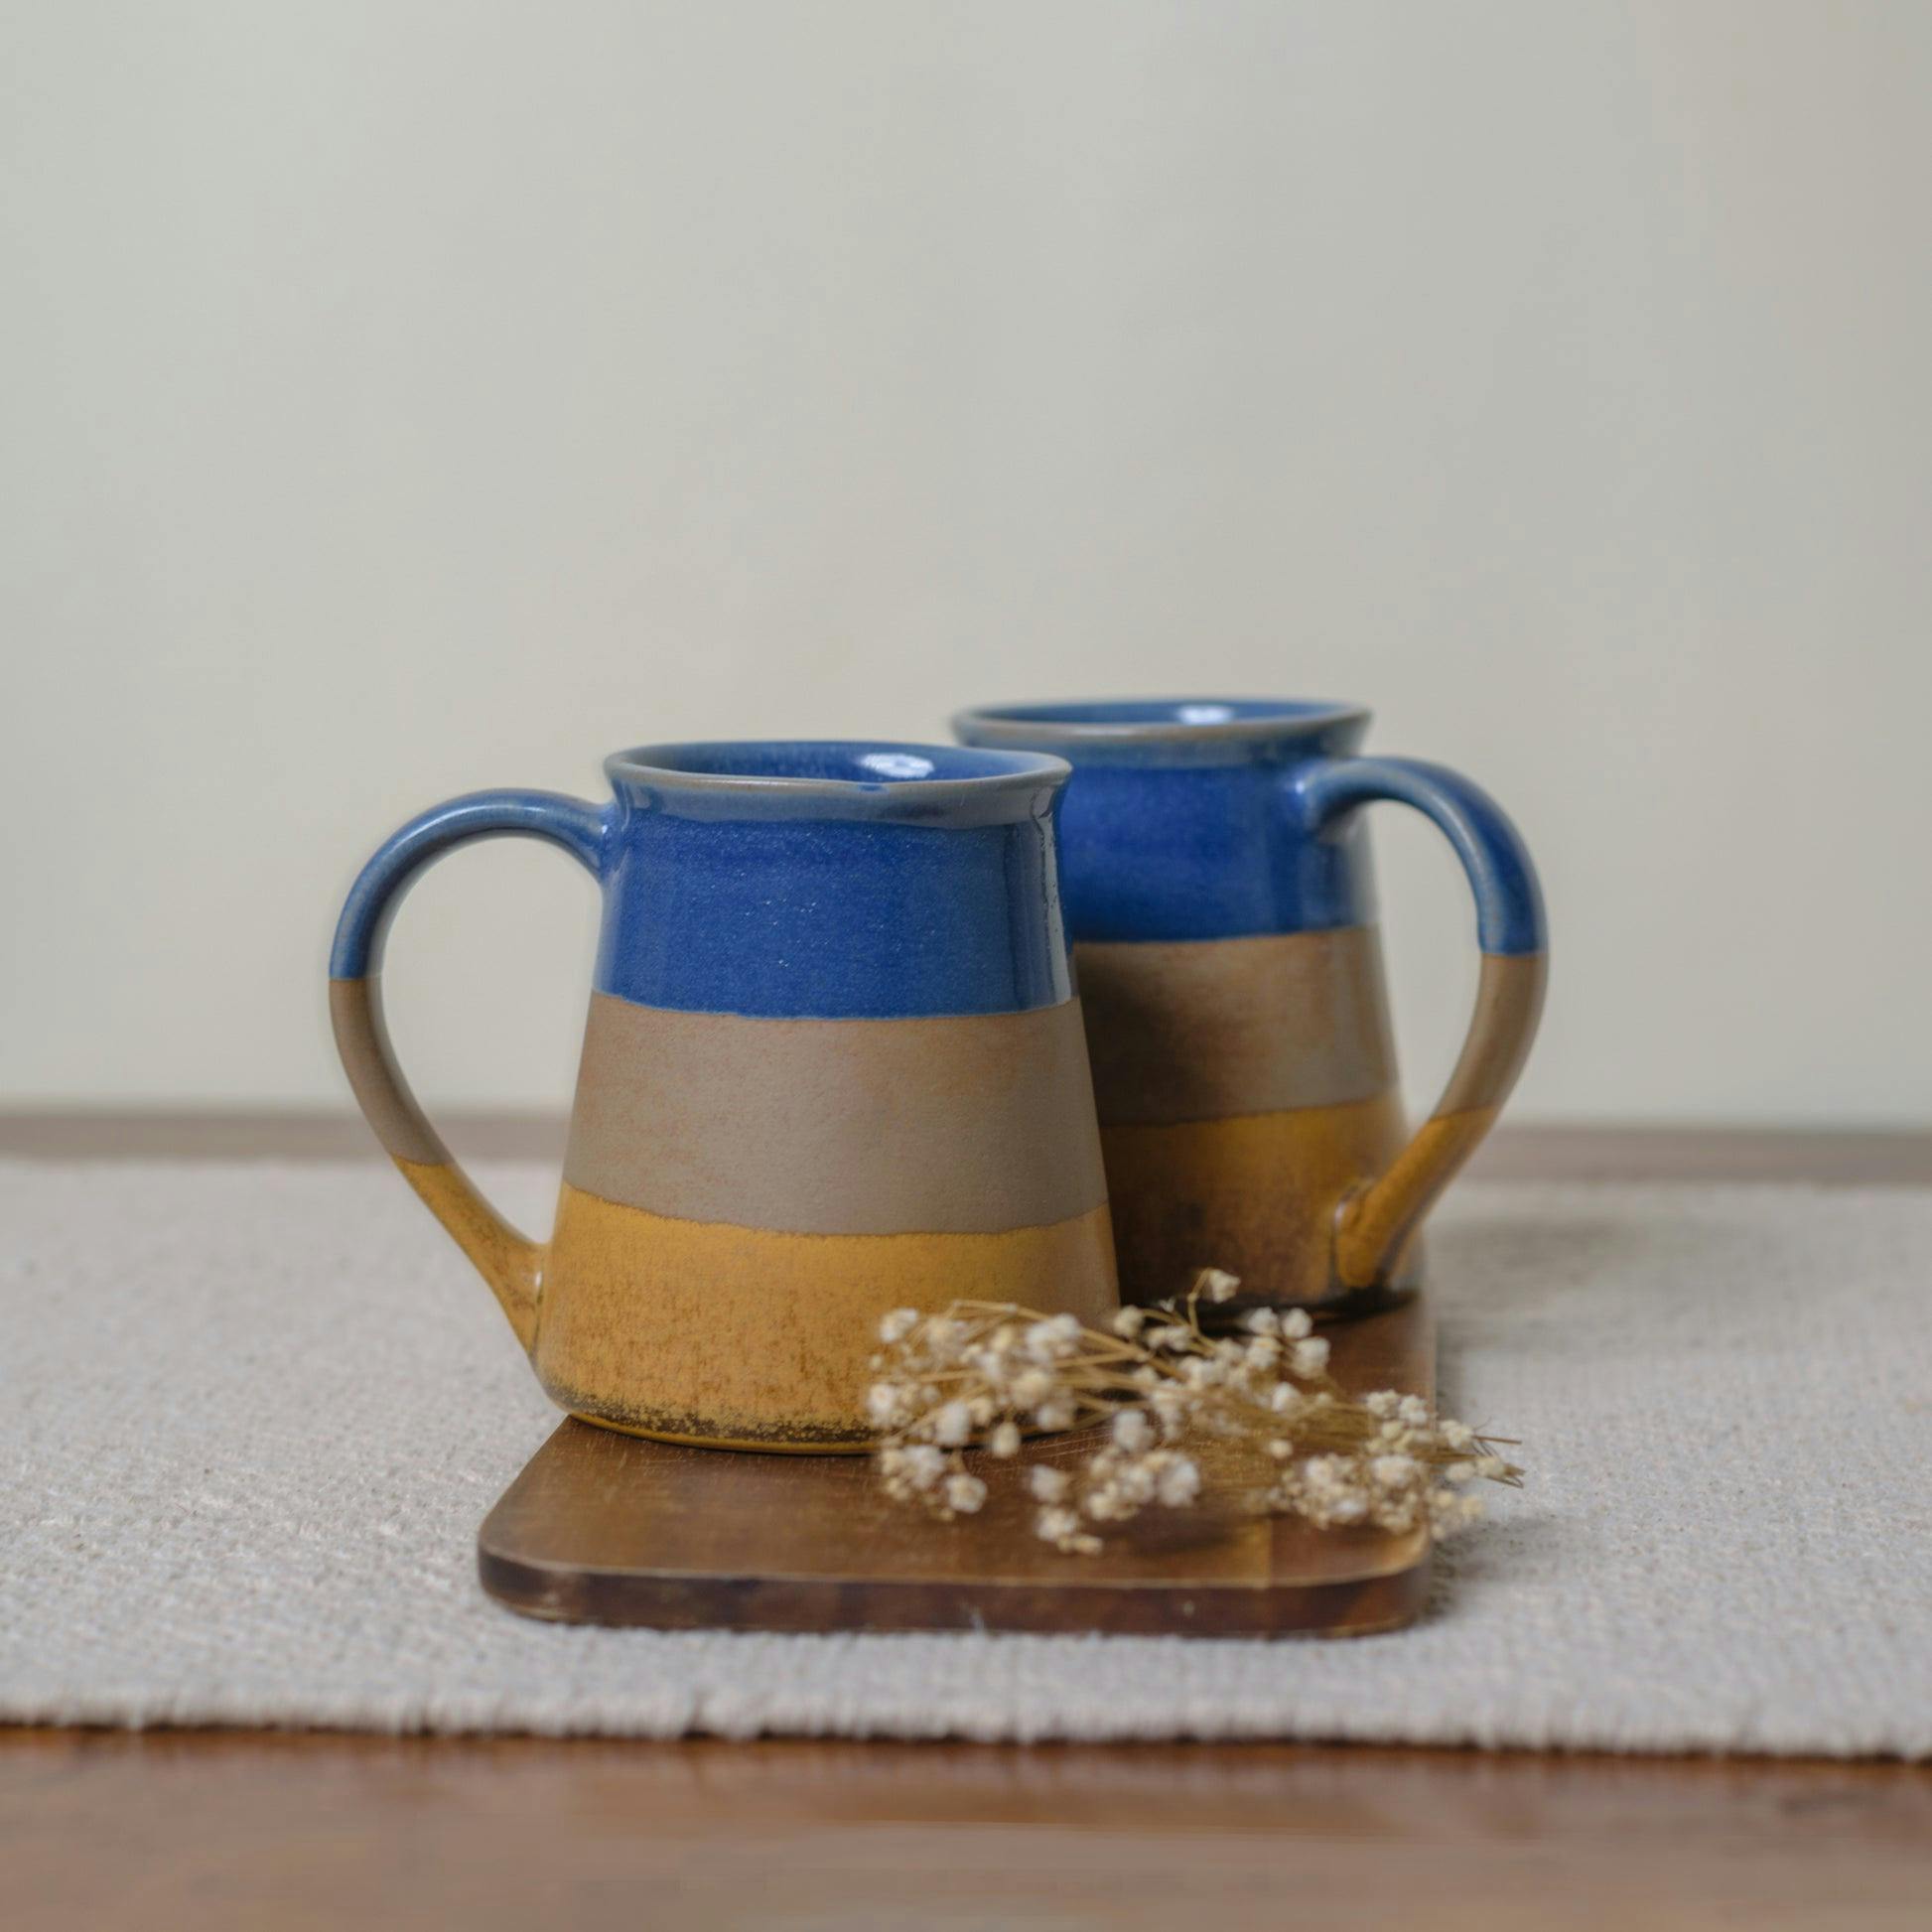 Earth Mugs Blue - set of 2, a product by Oh Yay project